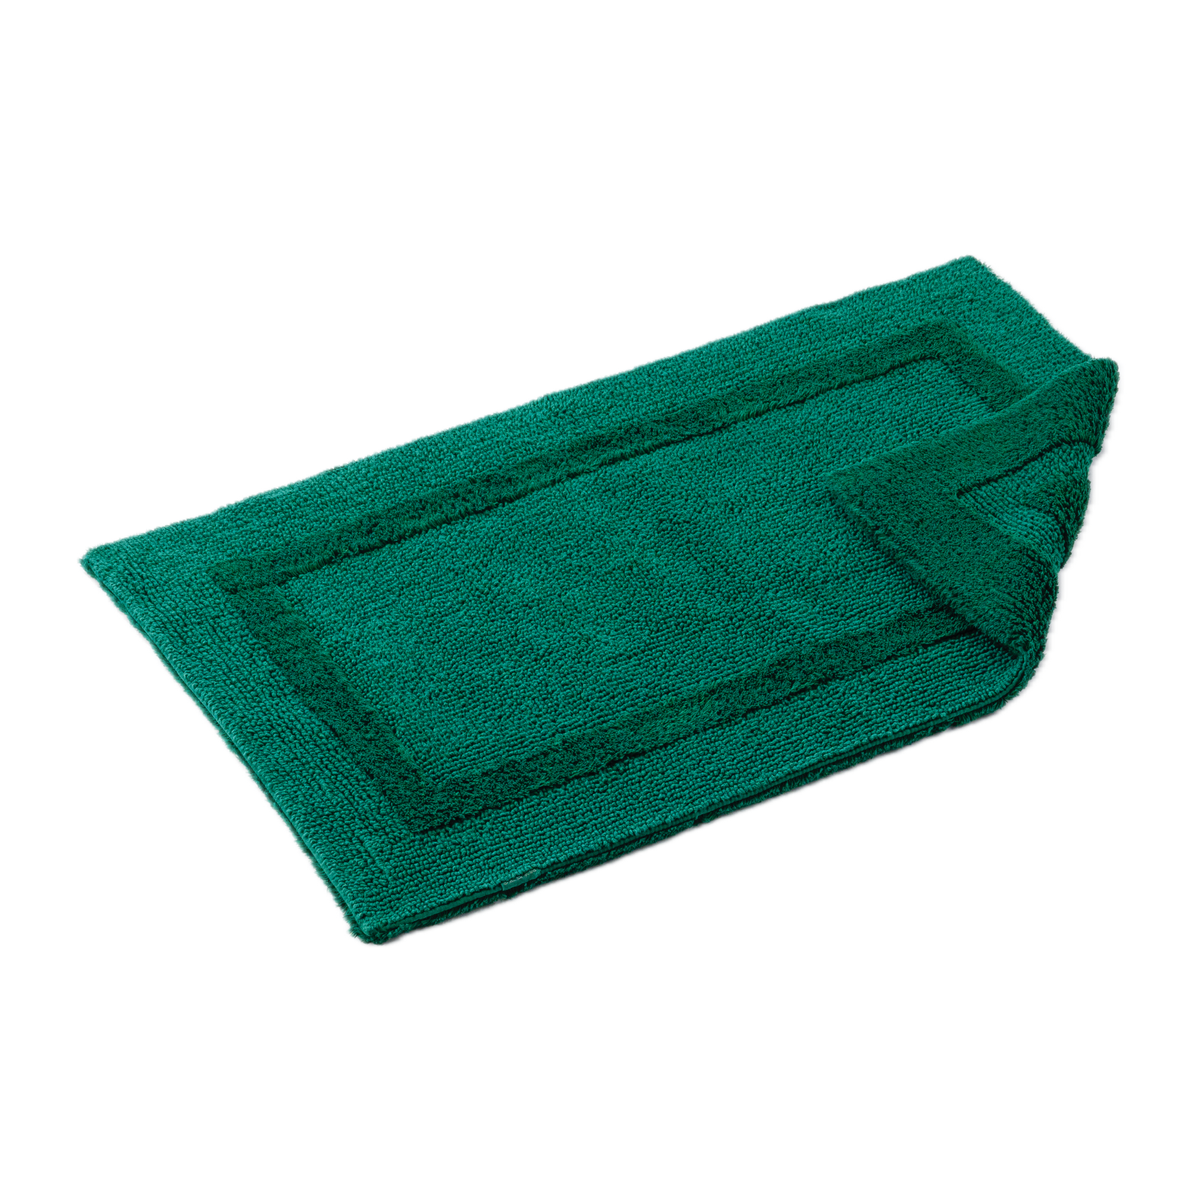 Tilted Image of Abyss Habidecor Reversible Bath Rug in British Green Color